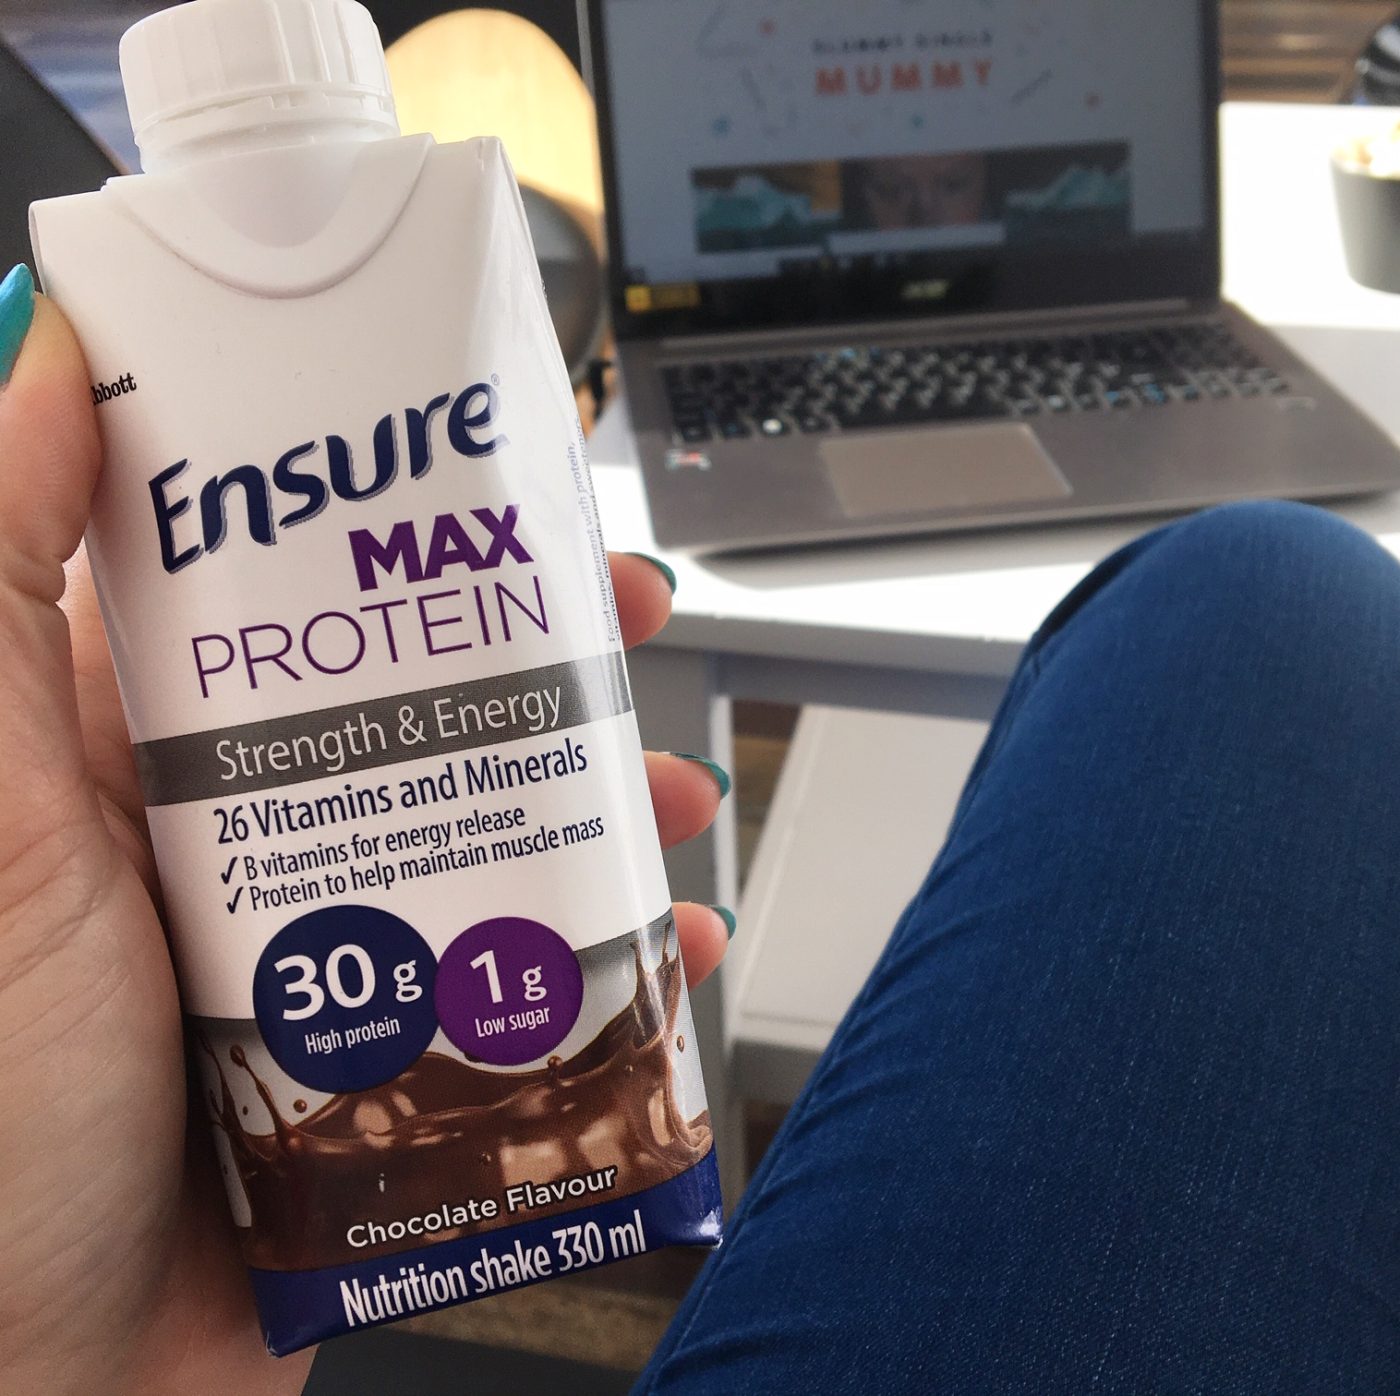 Ensure Max Protein review